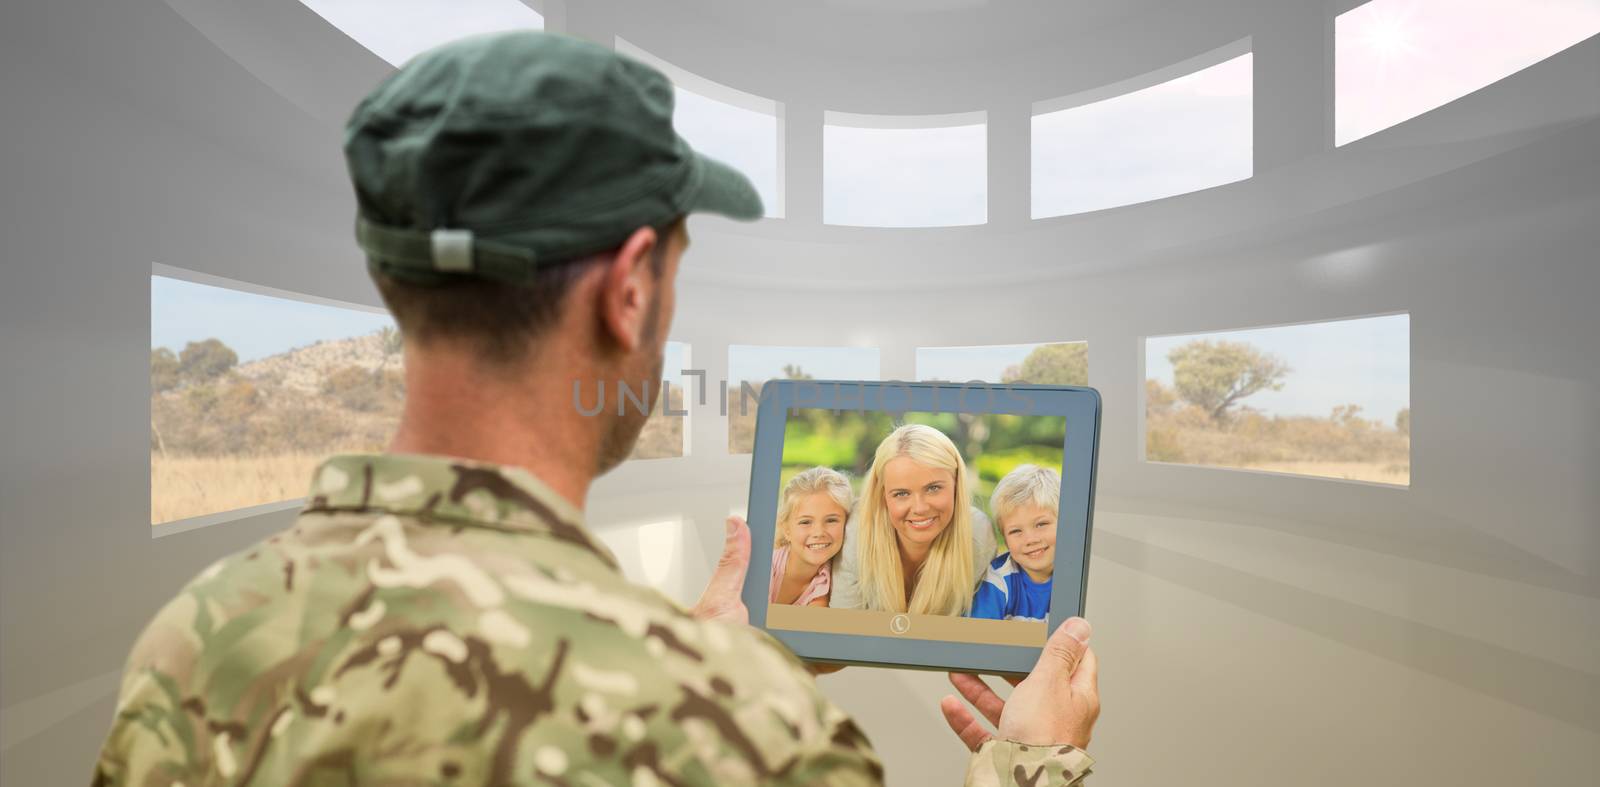 Soldier using tablet pc against bright room with windows